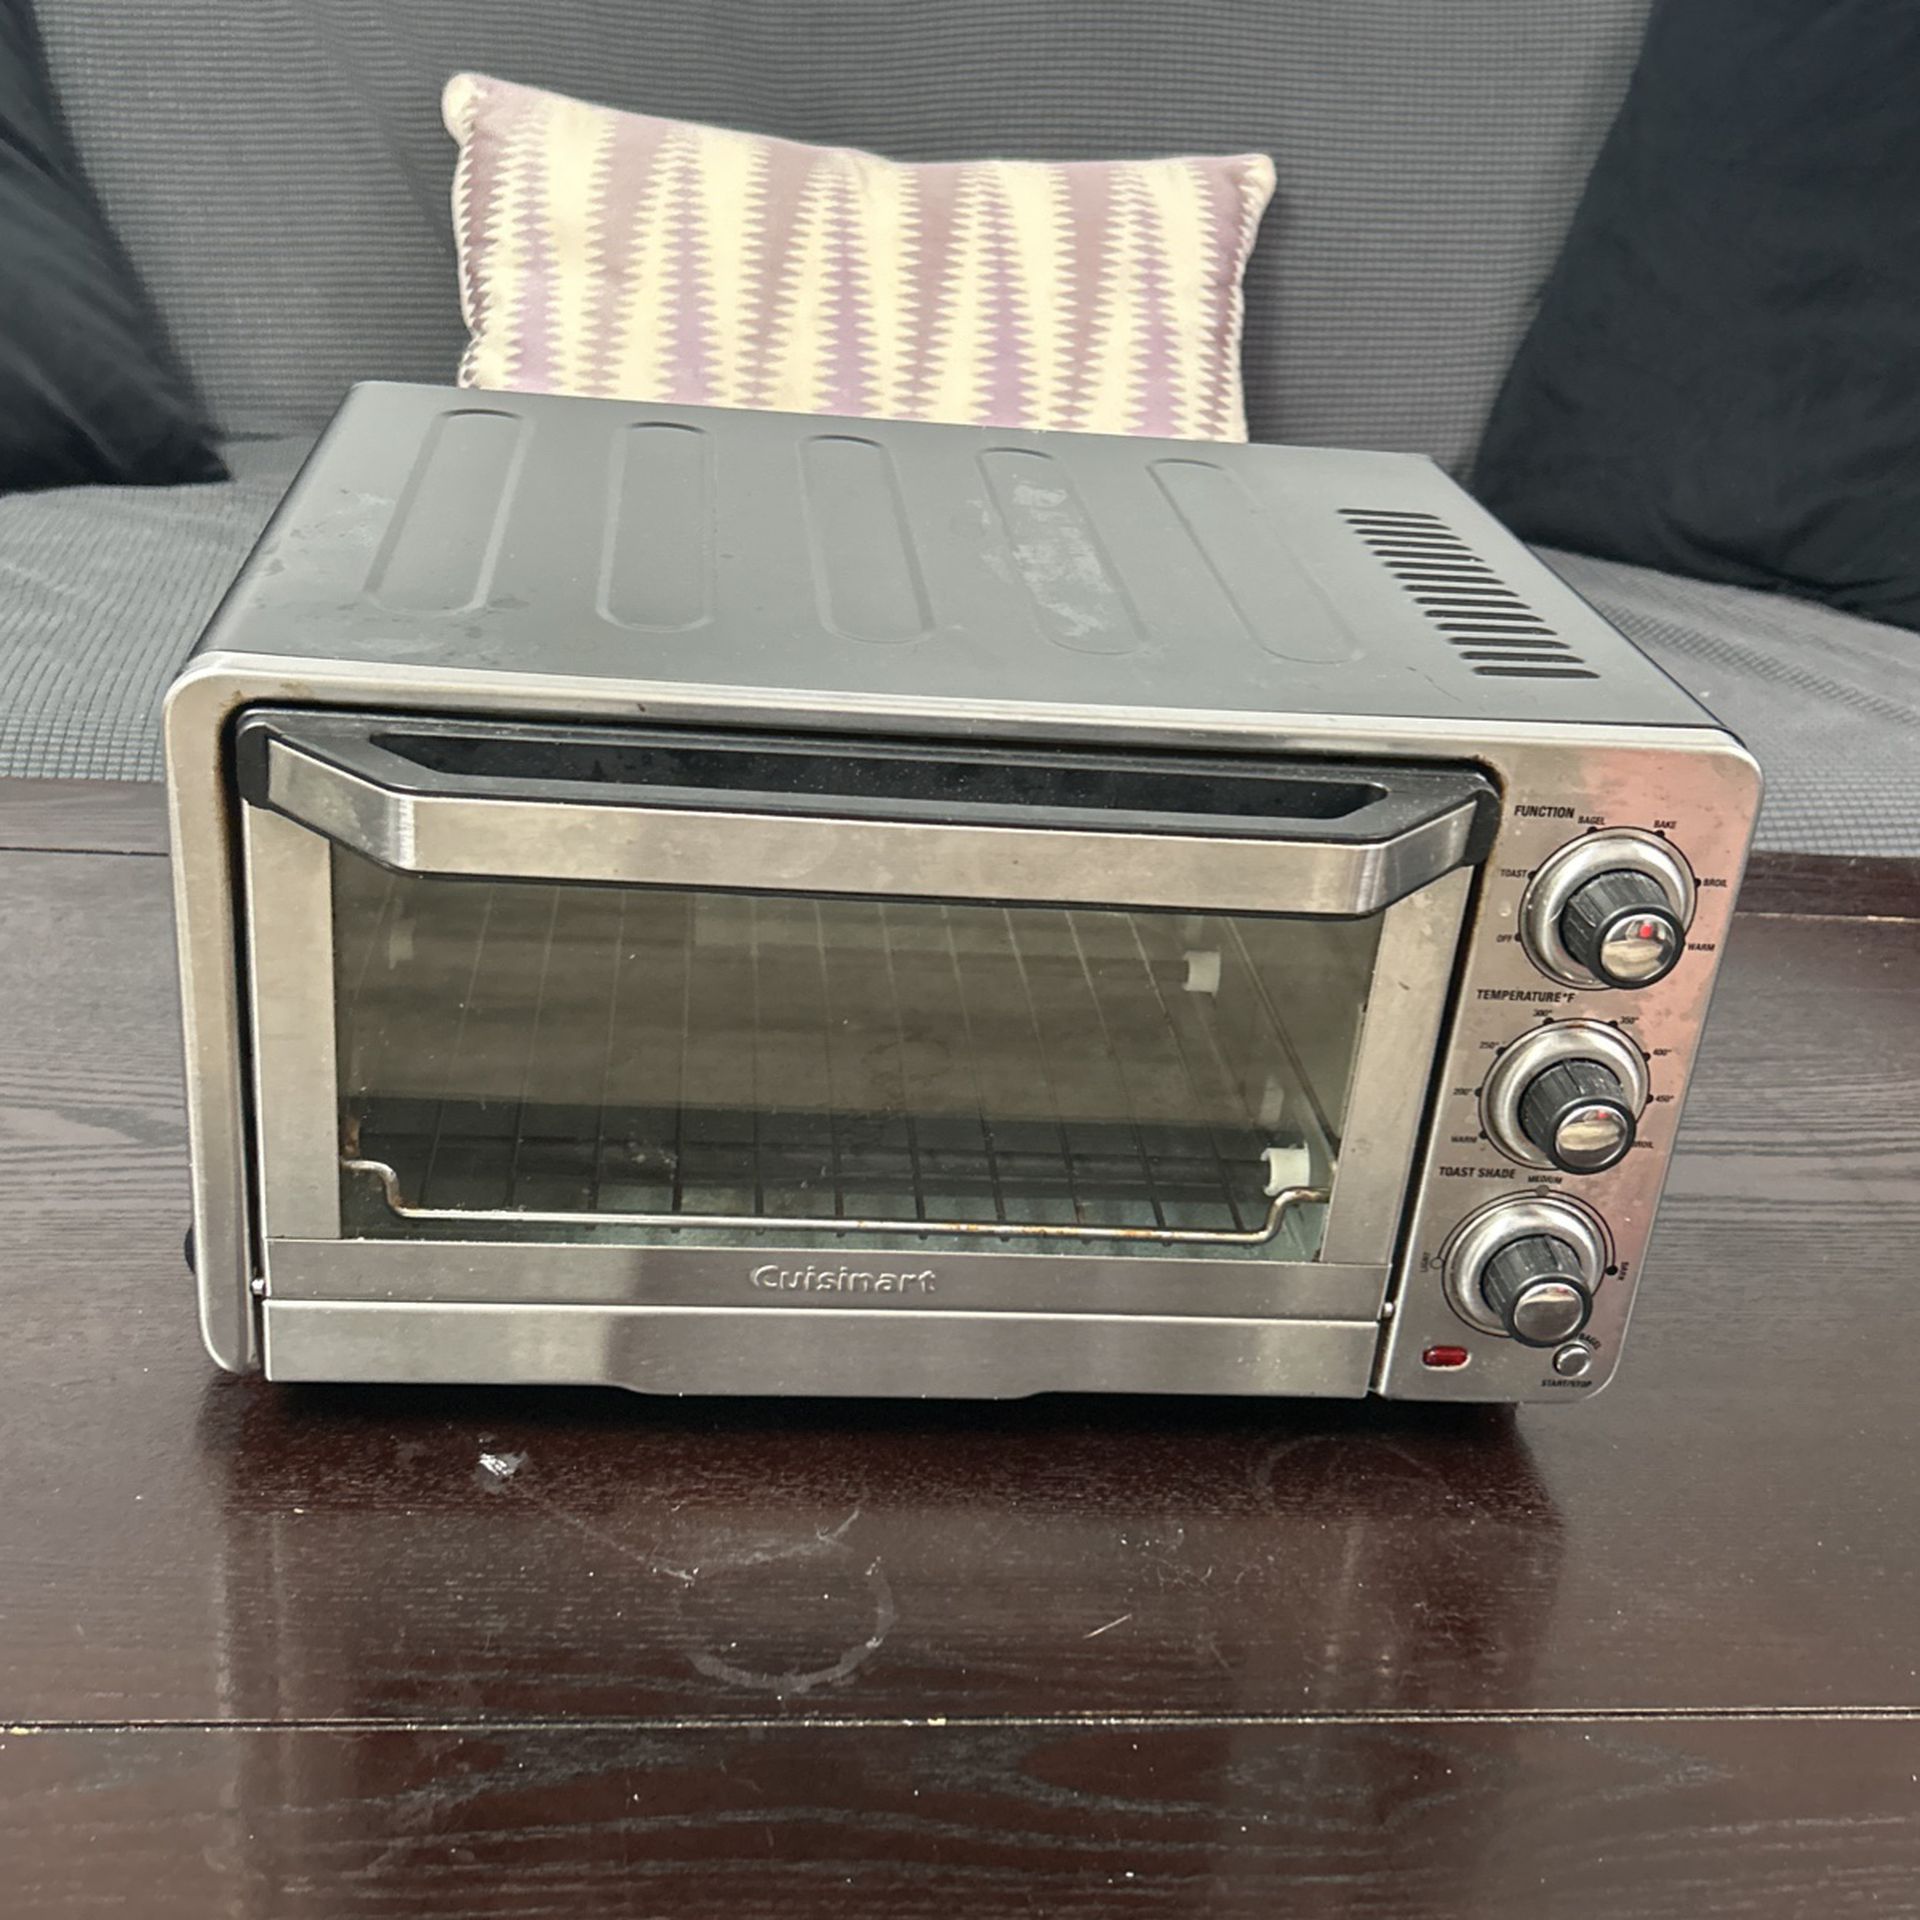 Toaster Oven / Broiler - Used, Small, Chrome & Black